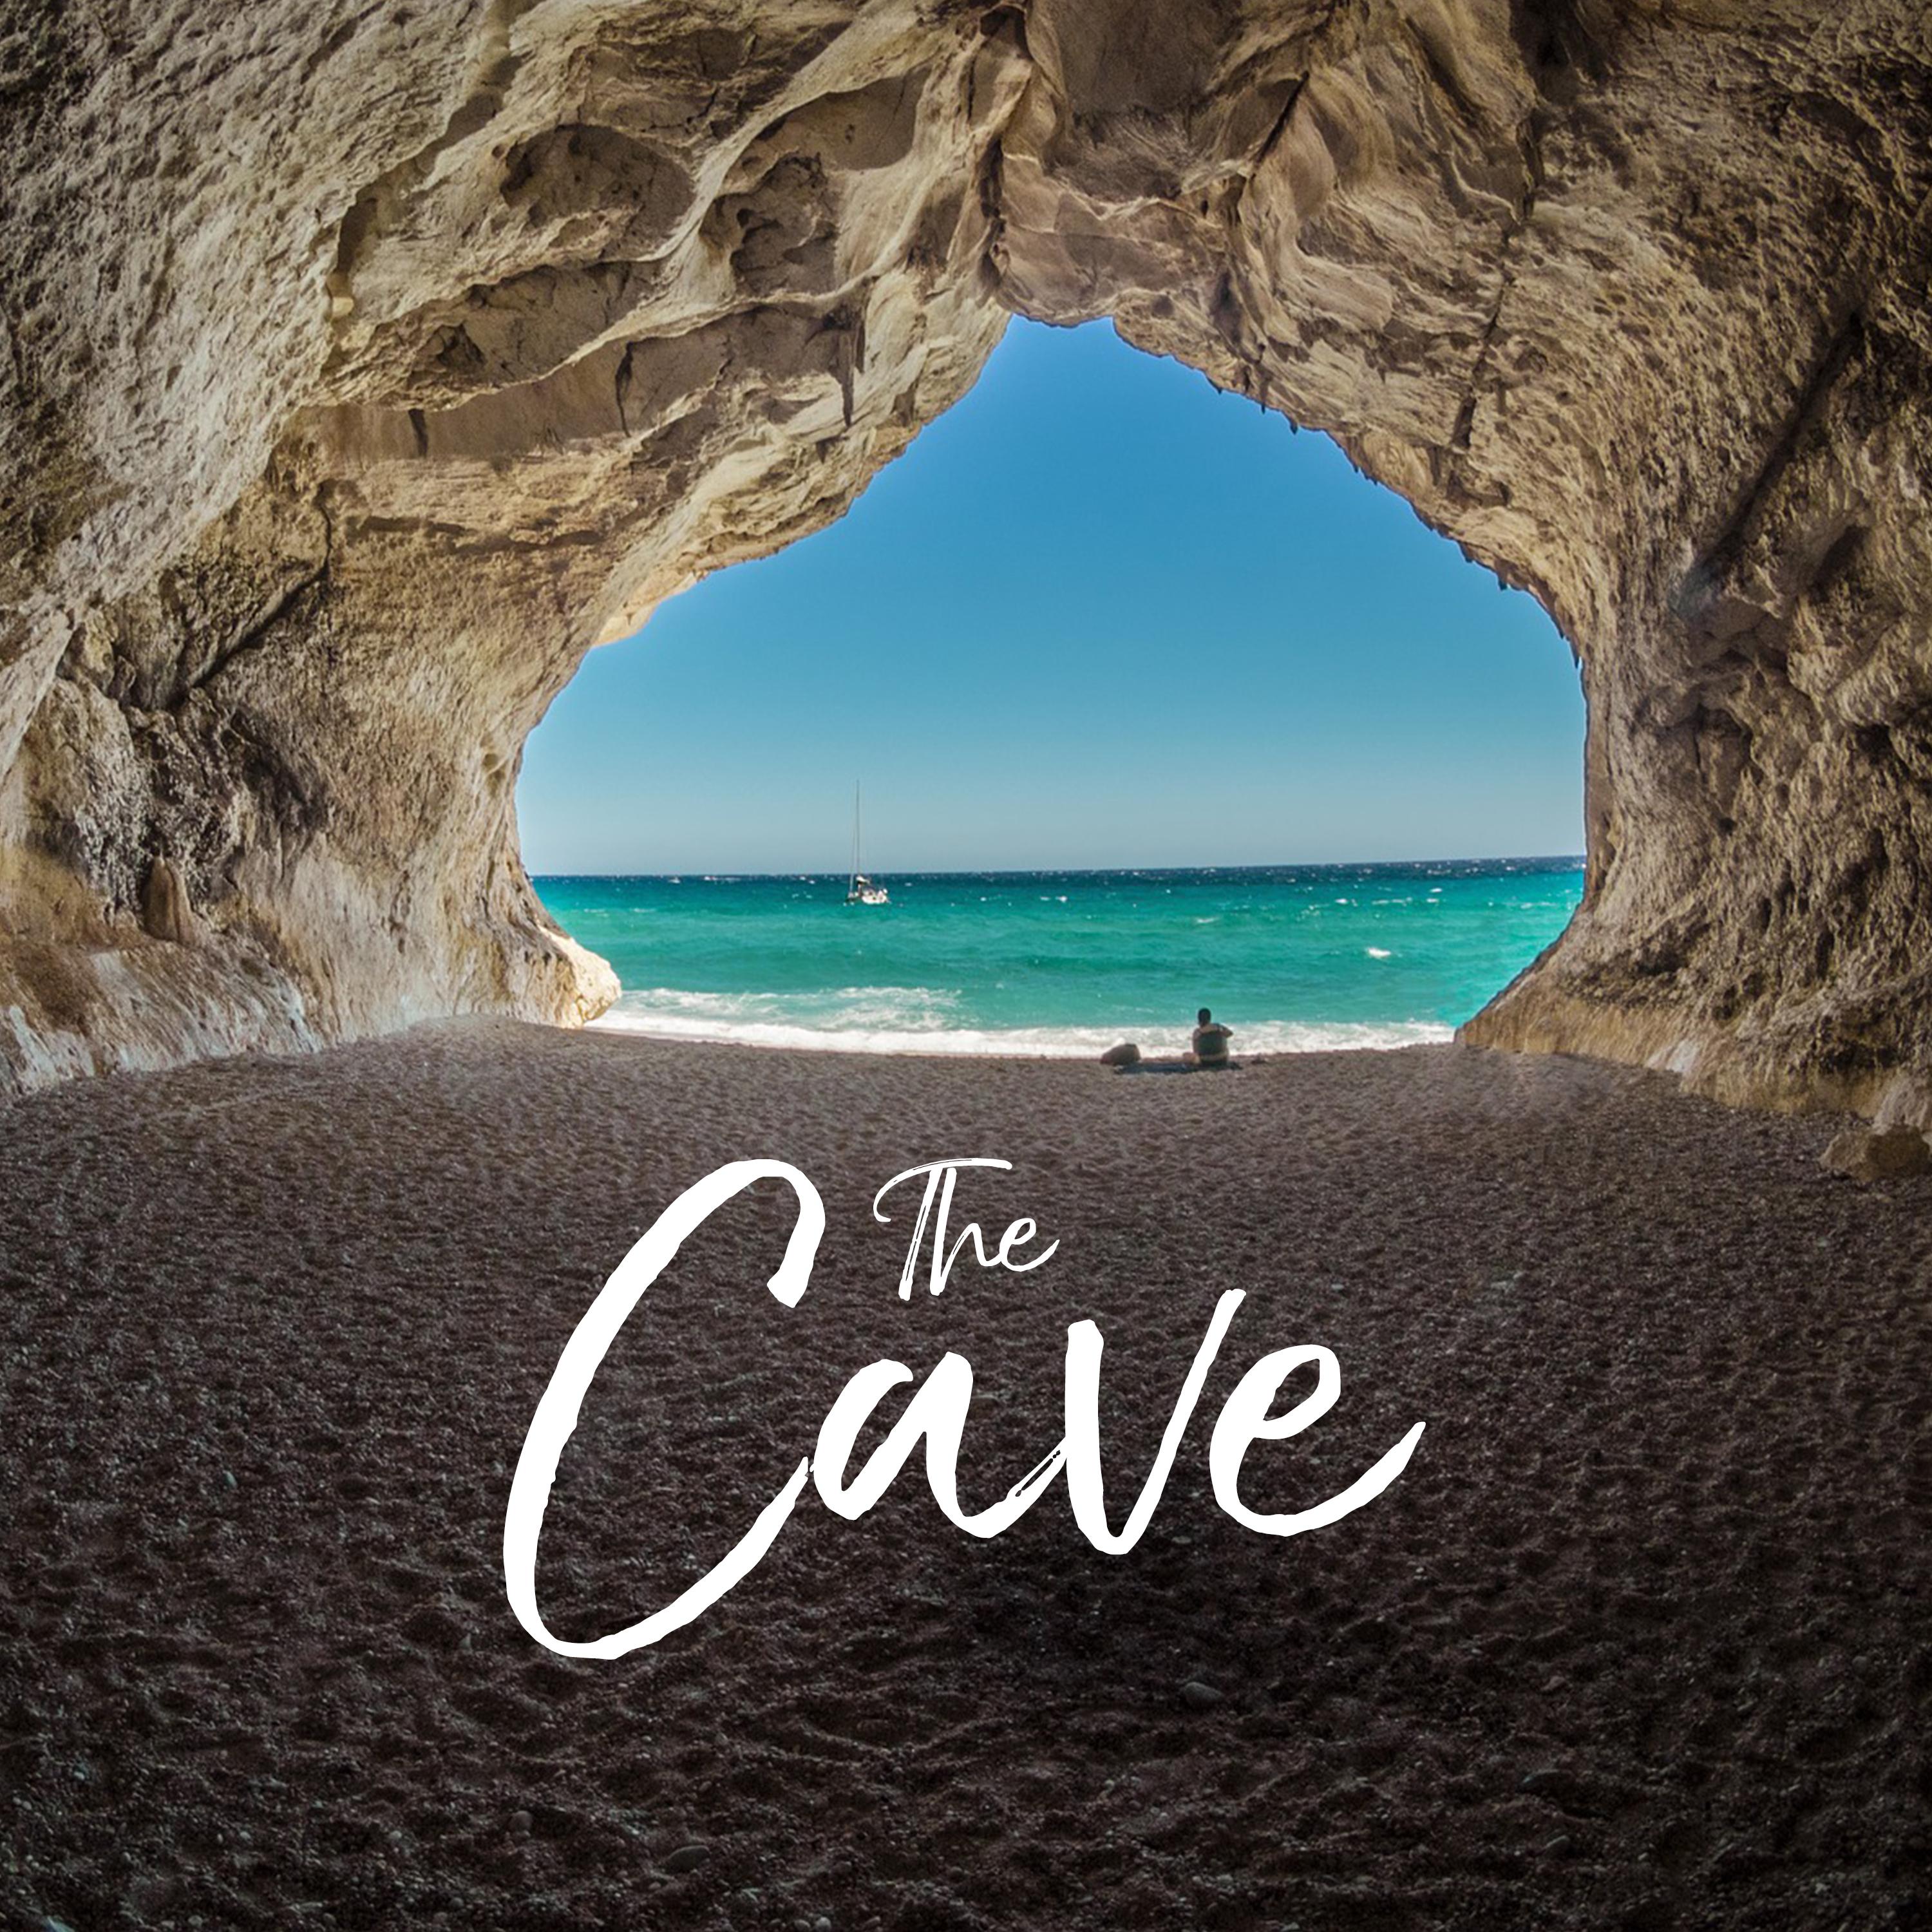 The Cave (Slow & Atmospheric Music for Control Stress, Better Sleep & Relaxation)